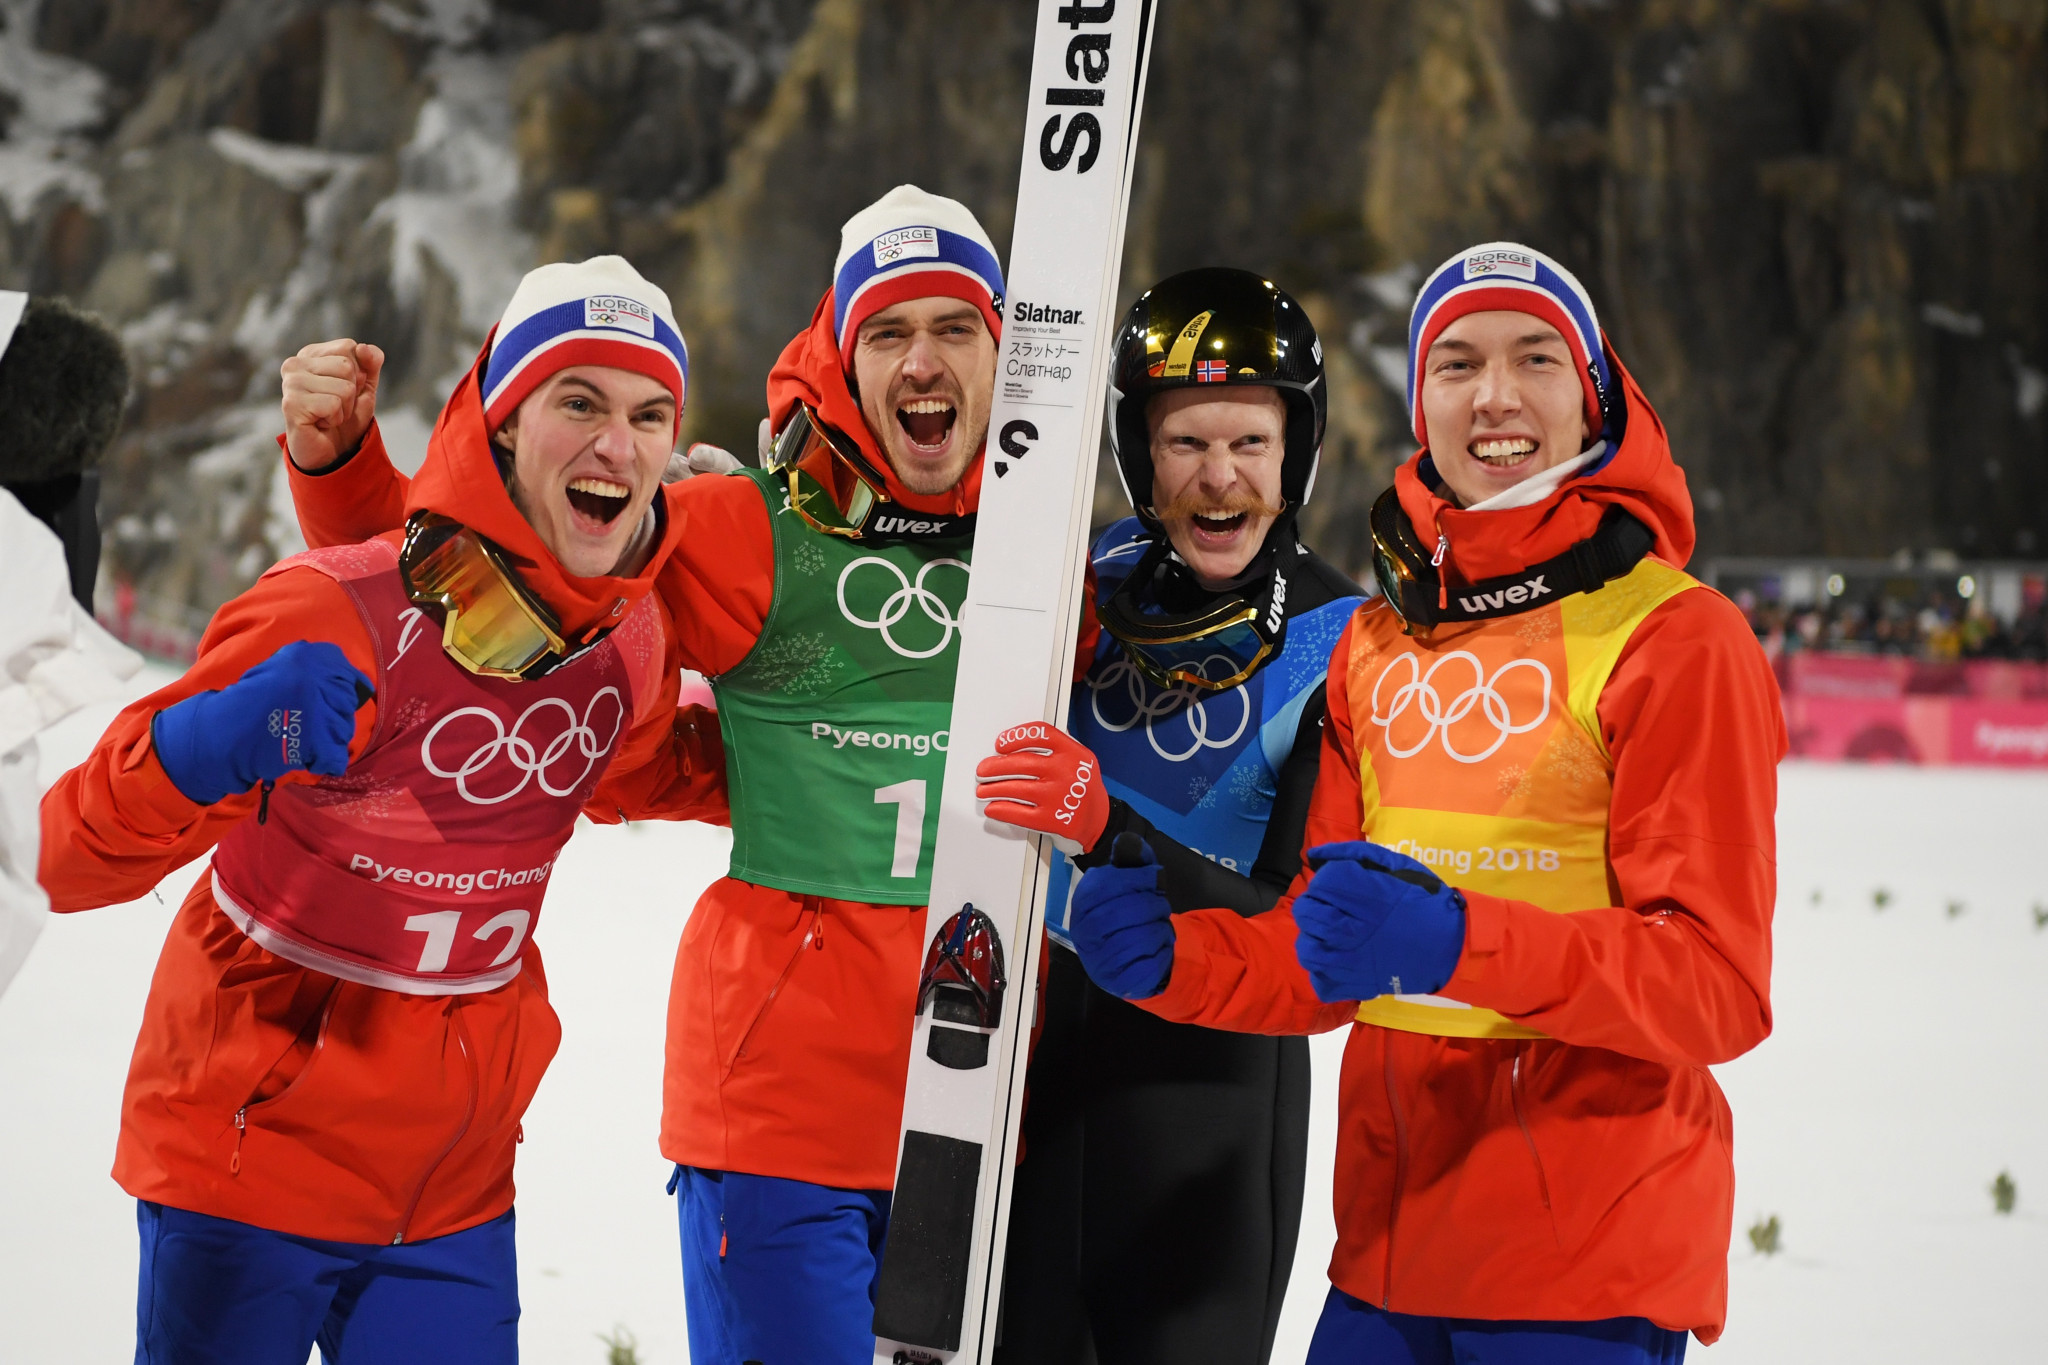 Norway won gold in the men’s team event as ski jumping action at the Pyeongchang 2018 Winter Olympic Games concluded today ©Getty Images